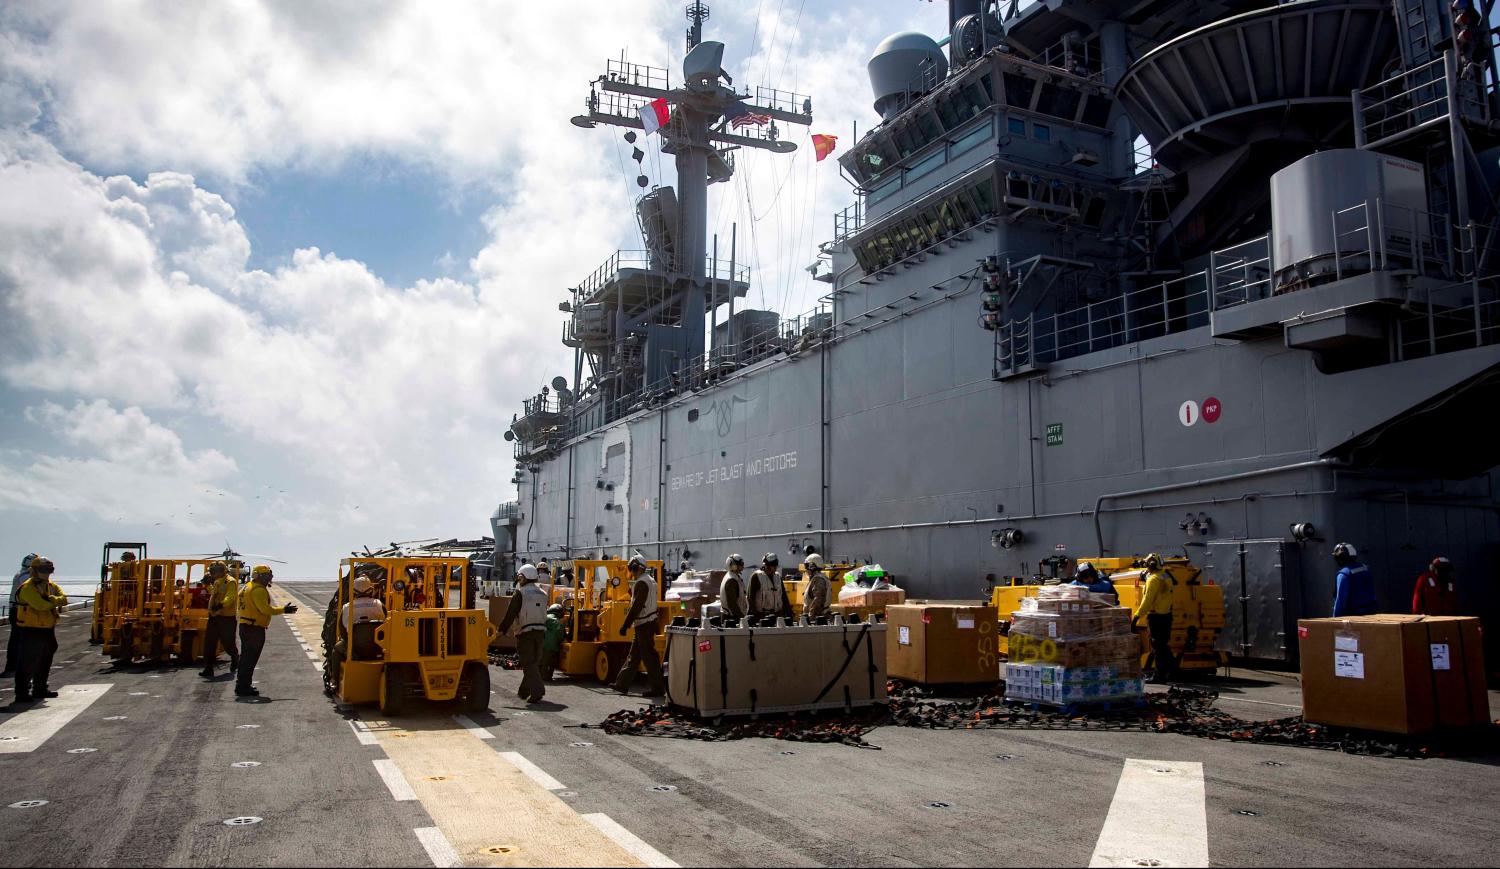 Sailors aboard the amphibious assault ship USS Kearsarge (LHD 3) move pallets of supplies on the flight deck during a replenishment-at-sea with the fast combat support ship USNS Supply (T-AOE 6) for relief efforts in the aftermath of Hurricane Maria in Puerto Rico on September 28, 2017. Picture taken on September 28, 2017. Courtesy Ryre Arciaga/U.S. Navy/Handout via REUTERS ATTENTION EDITORS - THIS IMAGE HAS BEEN SUPPLIED BY A THIRD PARTY. - RC1F885AD890